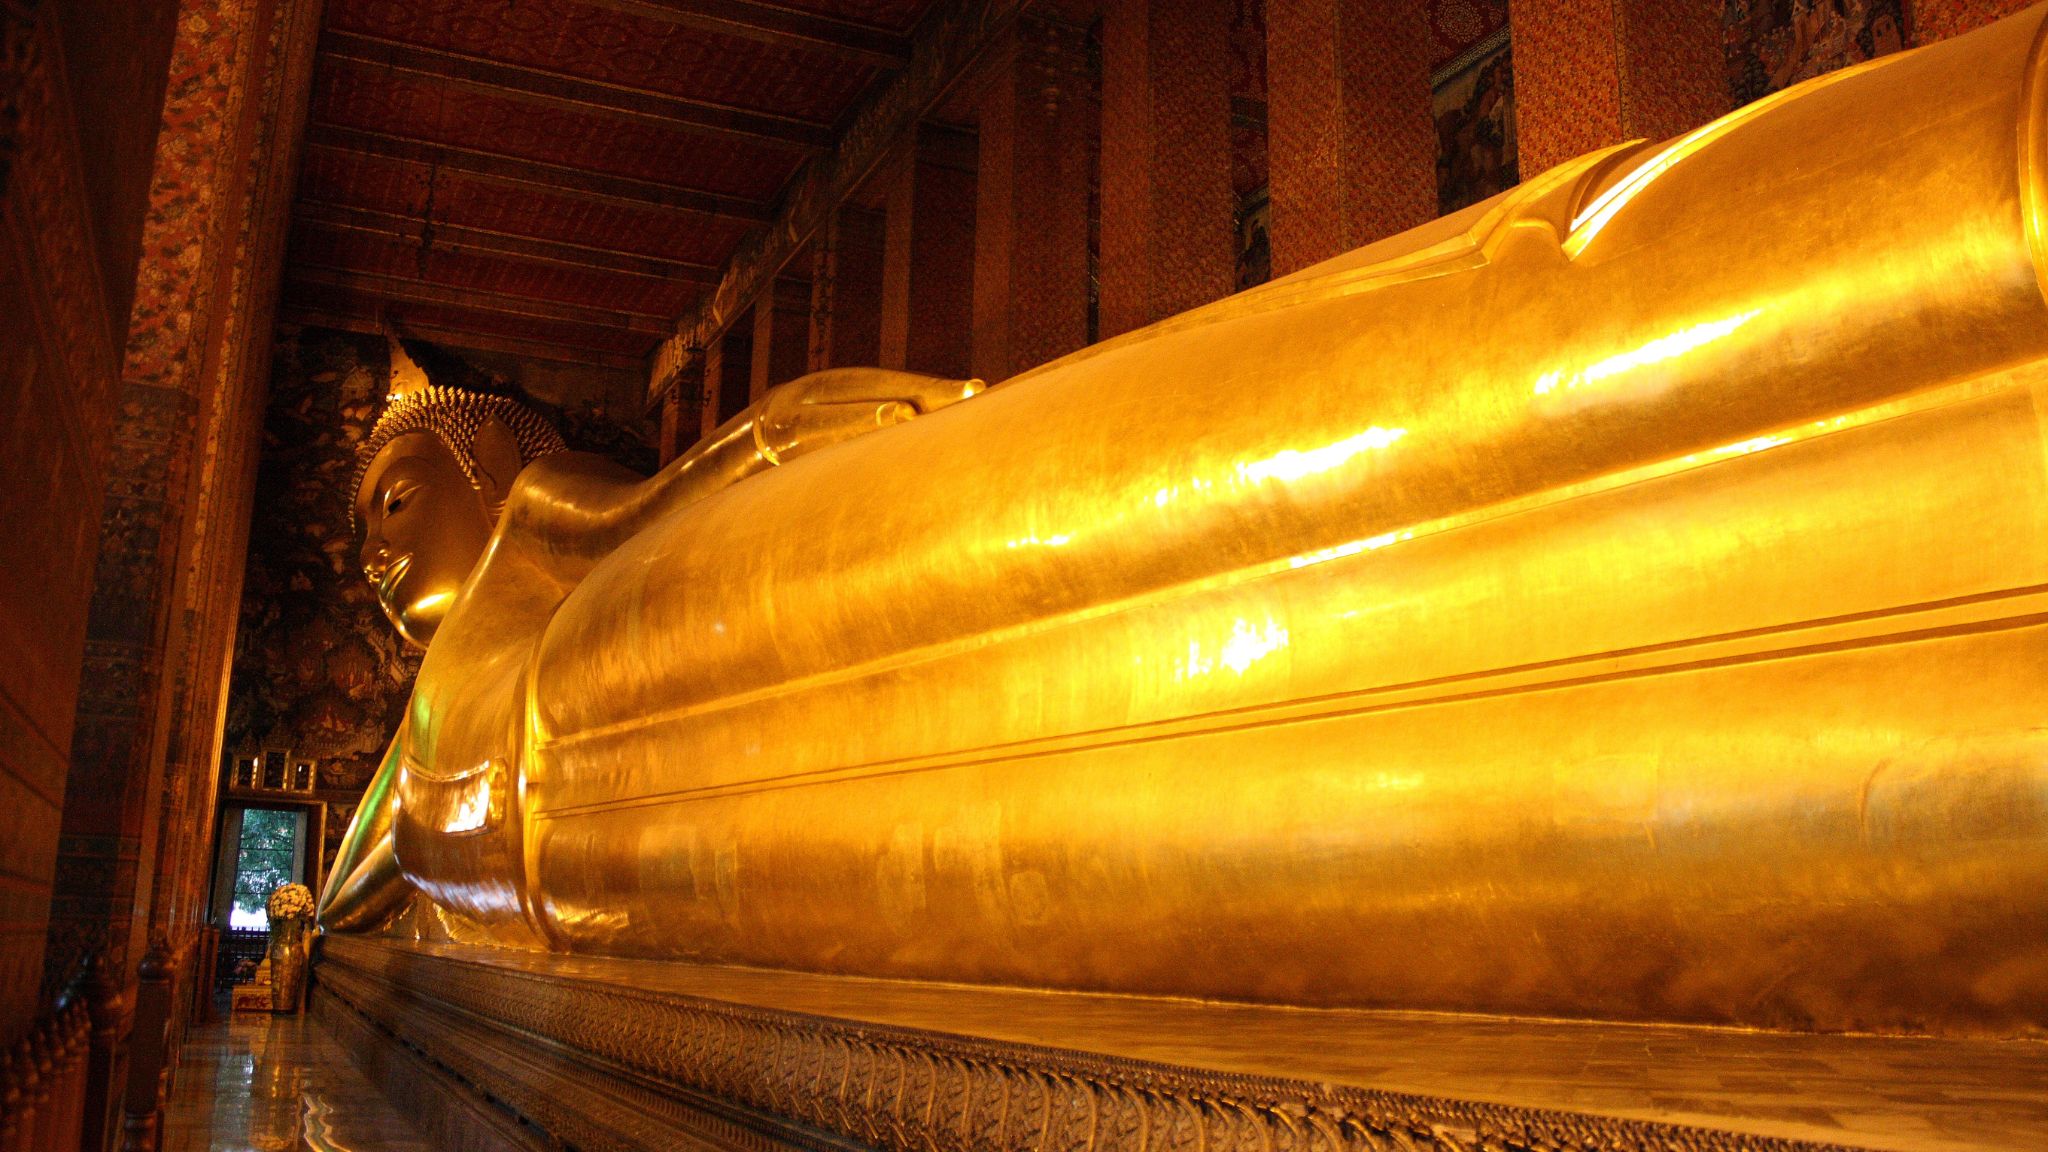 Day 2 The Enormous Buddha Statue In Wat Pho